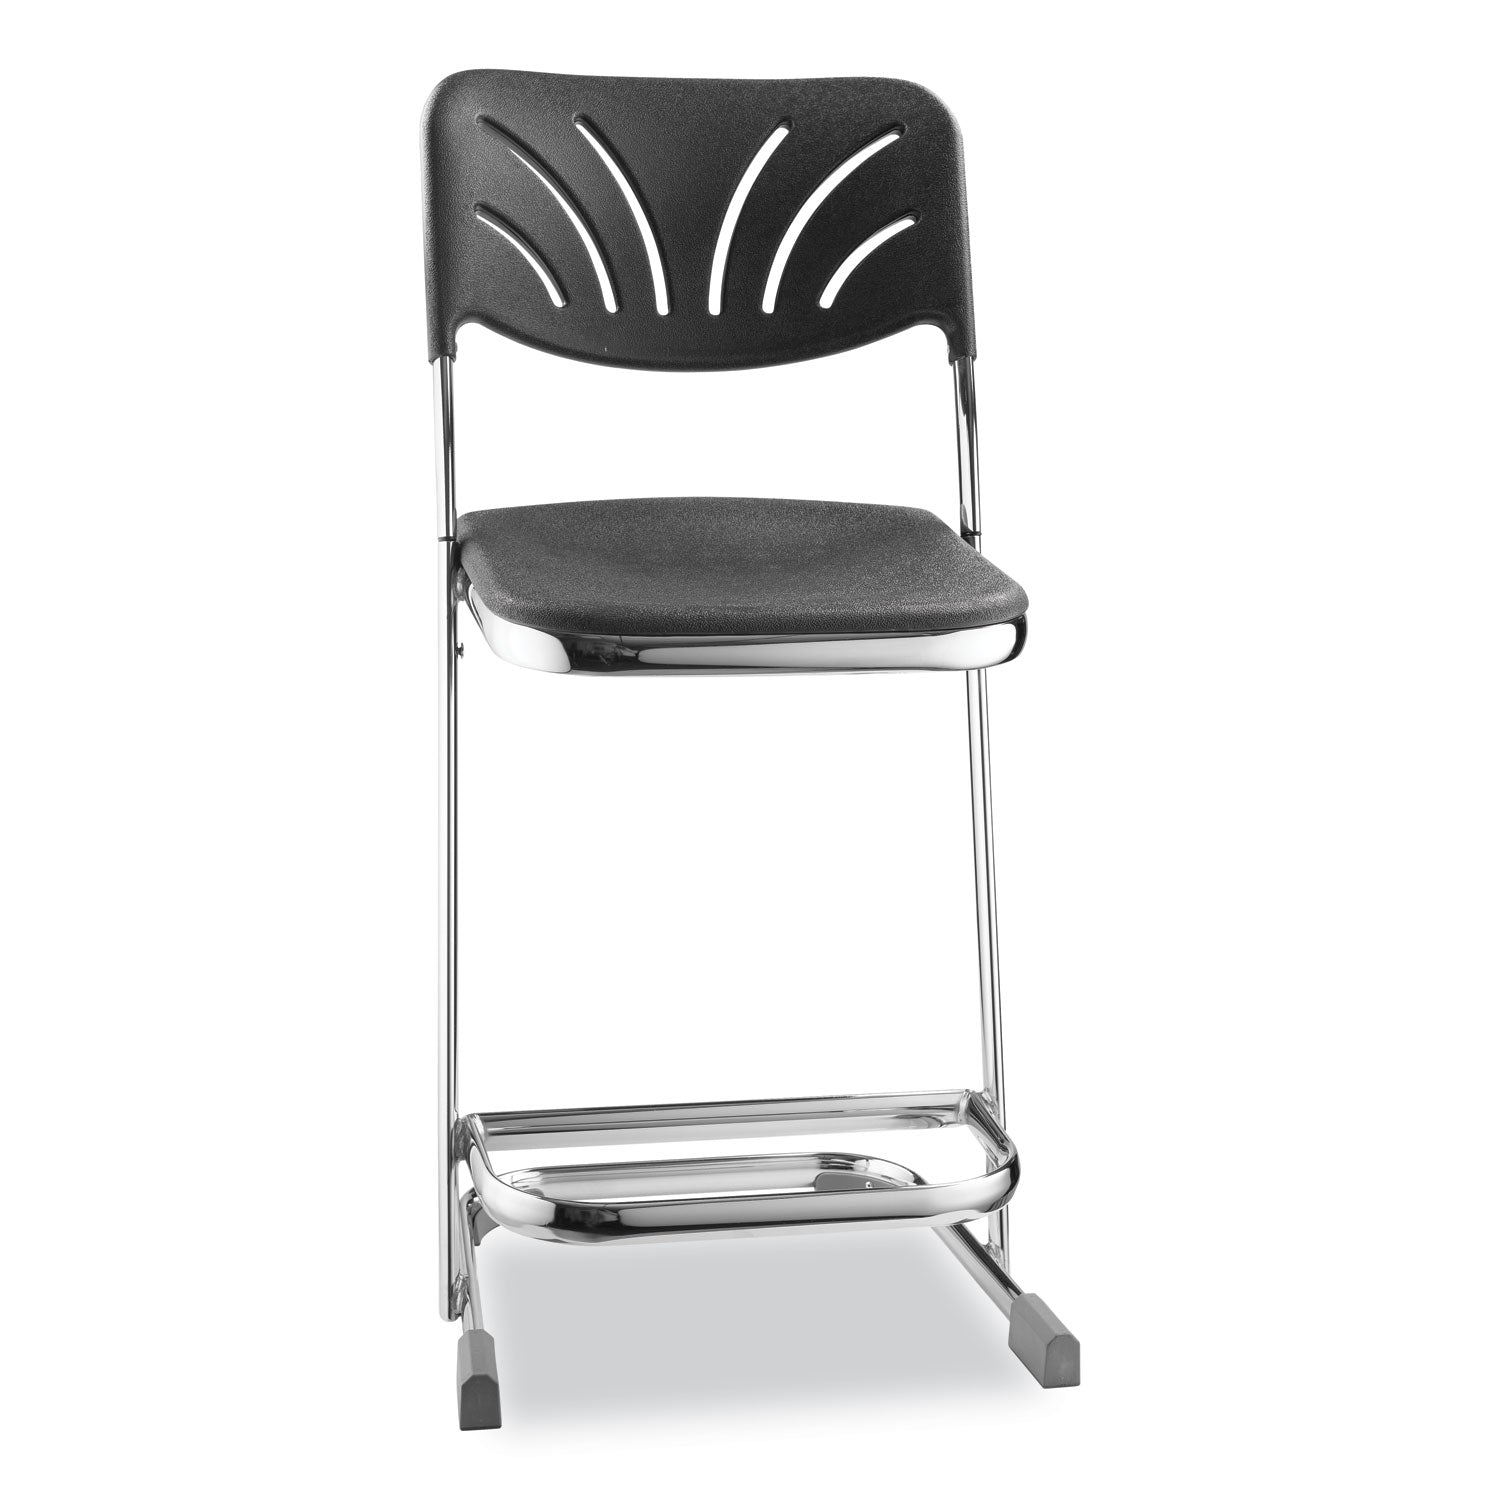 6600-series-elephant-z-stool-with-backrest-supports-500-lb-22-seat-ht-black-seat-back-chrome-frameships-in-1-3-bus-days_nps6622b - 2